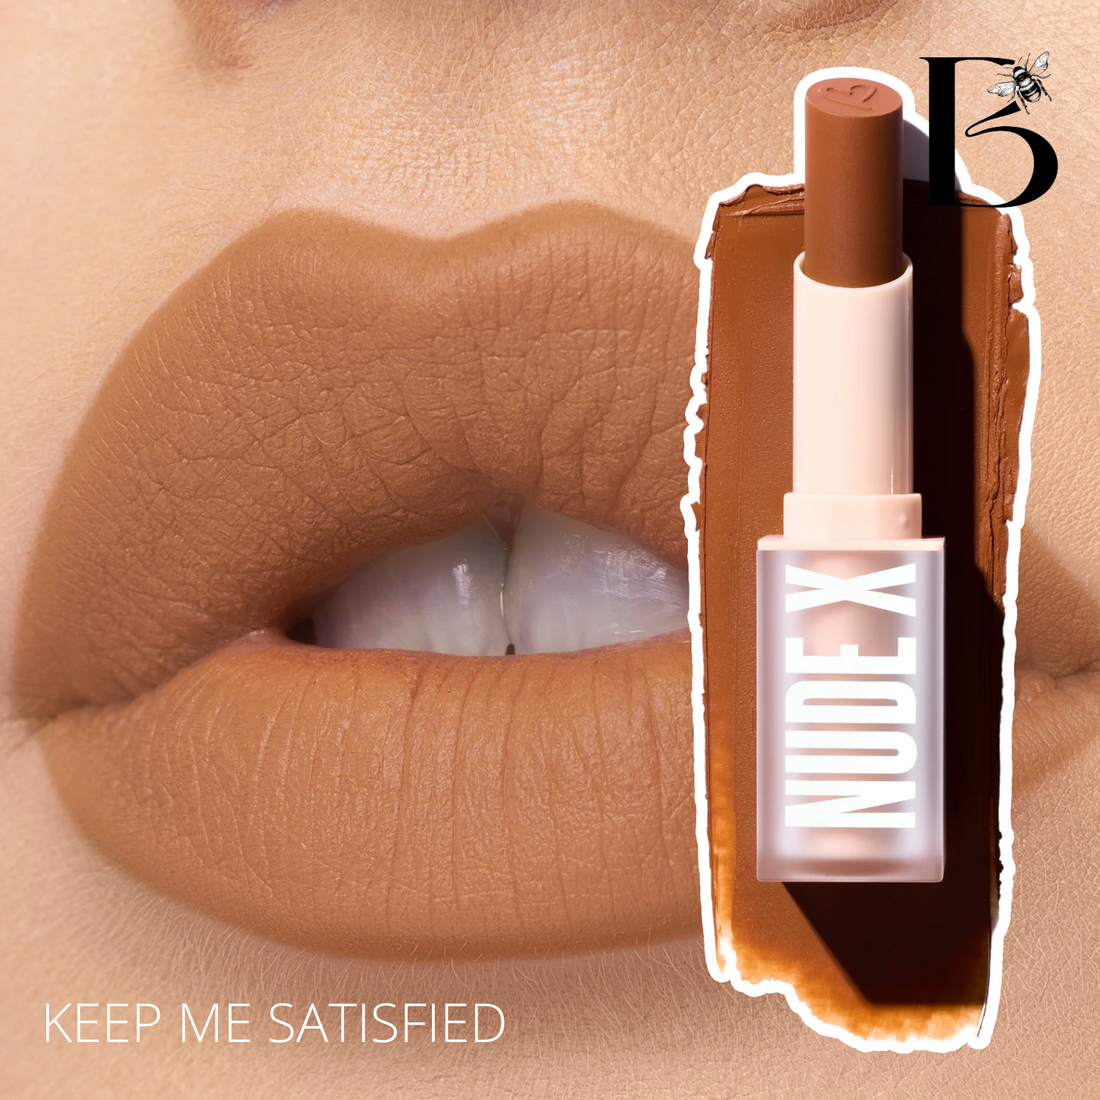 NUDE COLLECTION LIPSTICK